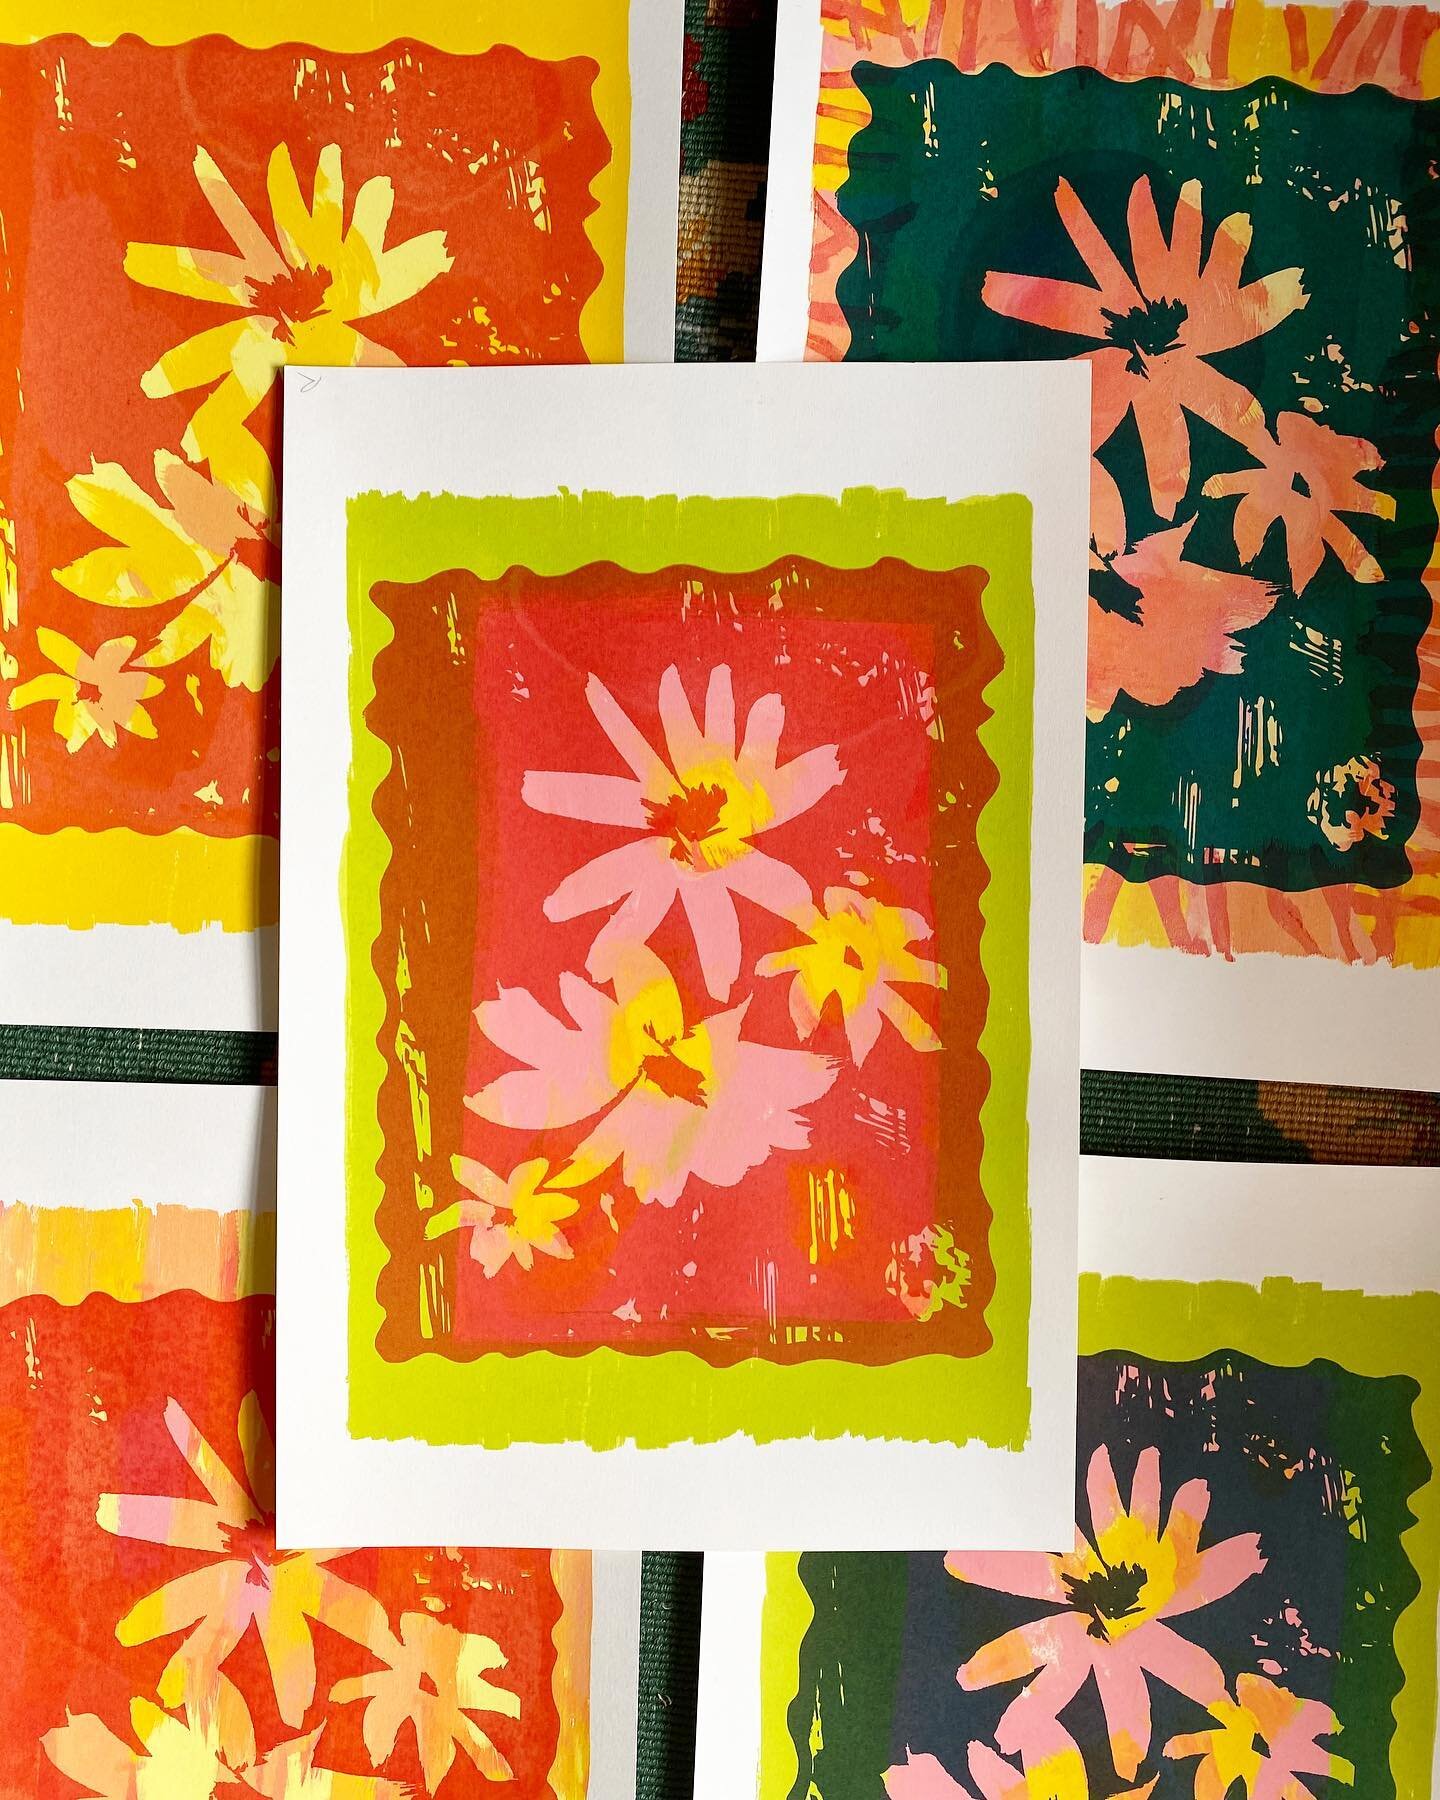 🌺 Flowers! Joy! Fancy a glorious pop of colour for your walls?! 🌞 One of a kind monoprints getting framed today for my show this weekend @artistsopenhse @dulwichfestival 

Screen-printing these was a magical experience 💫 and I am a little bit in l